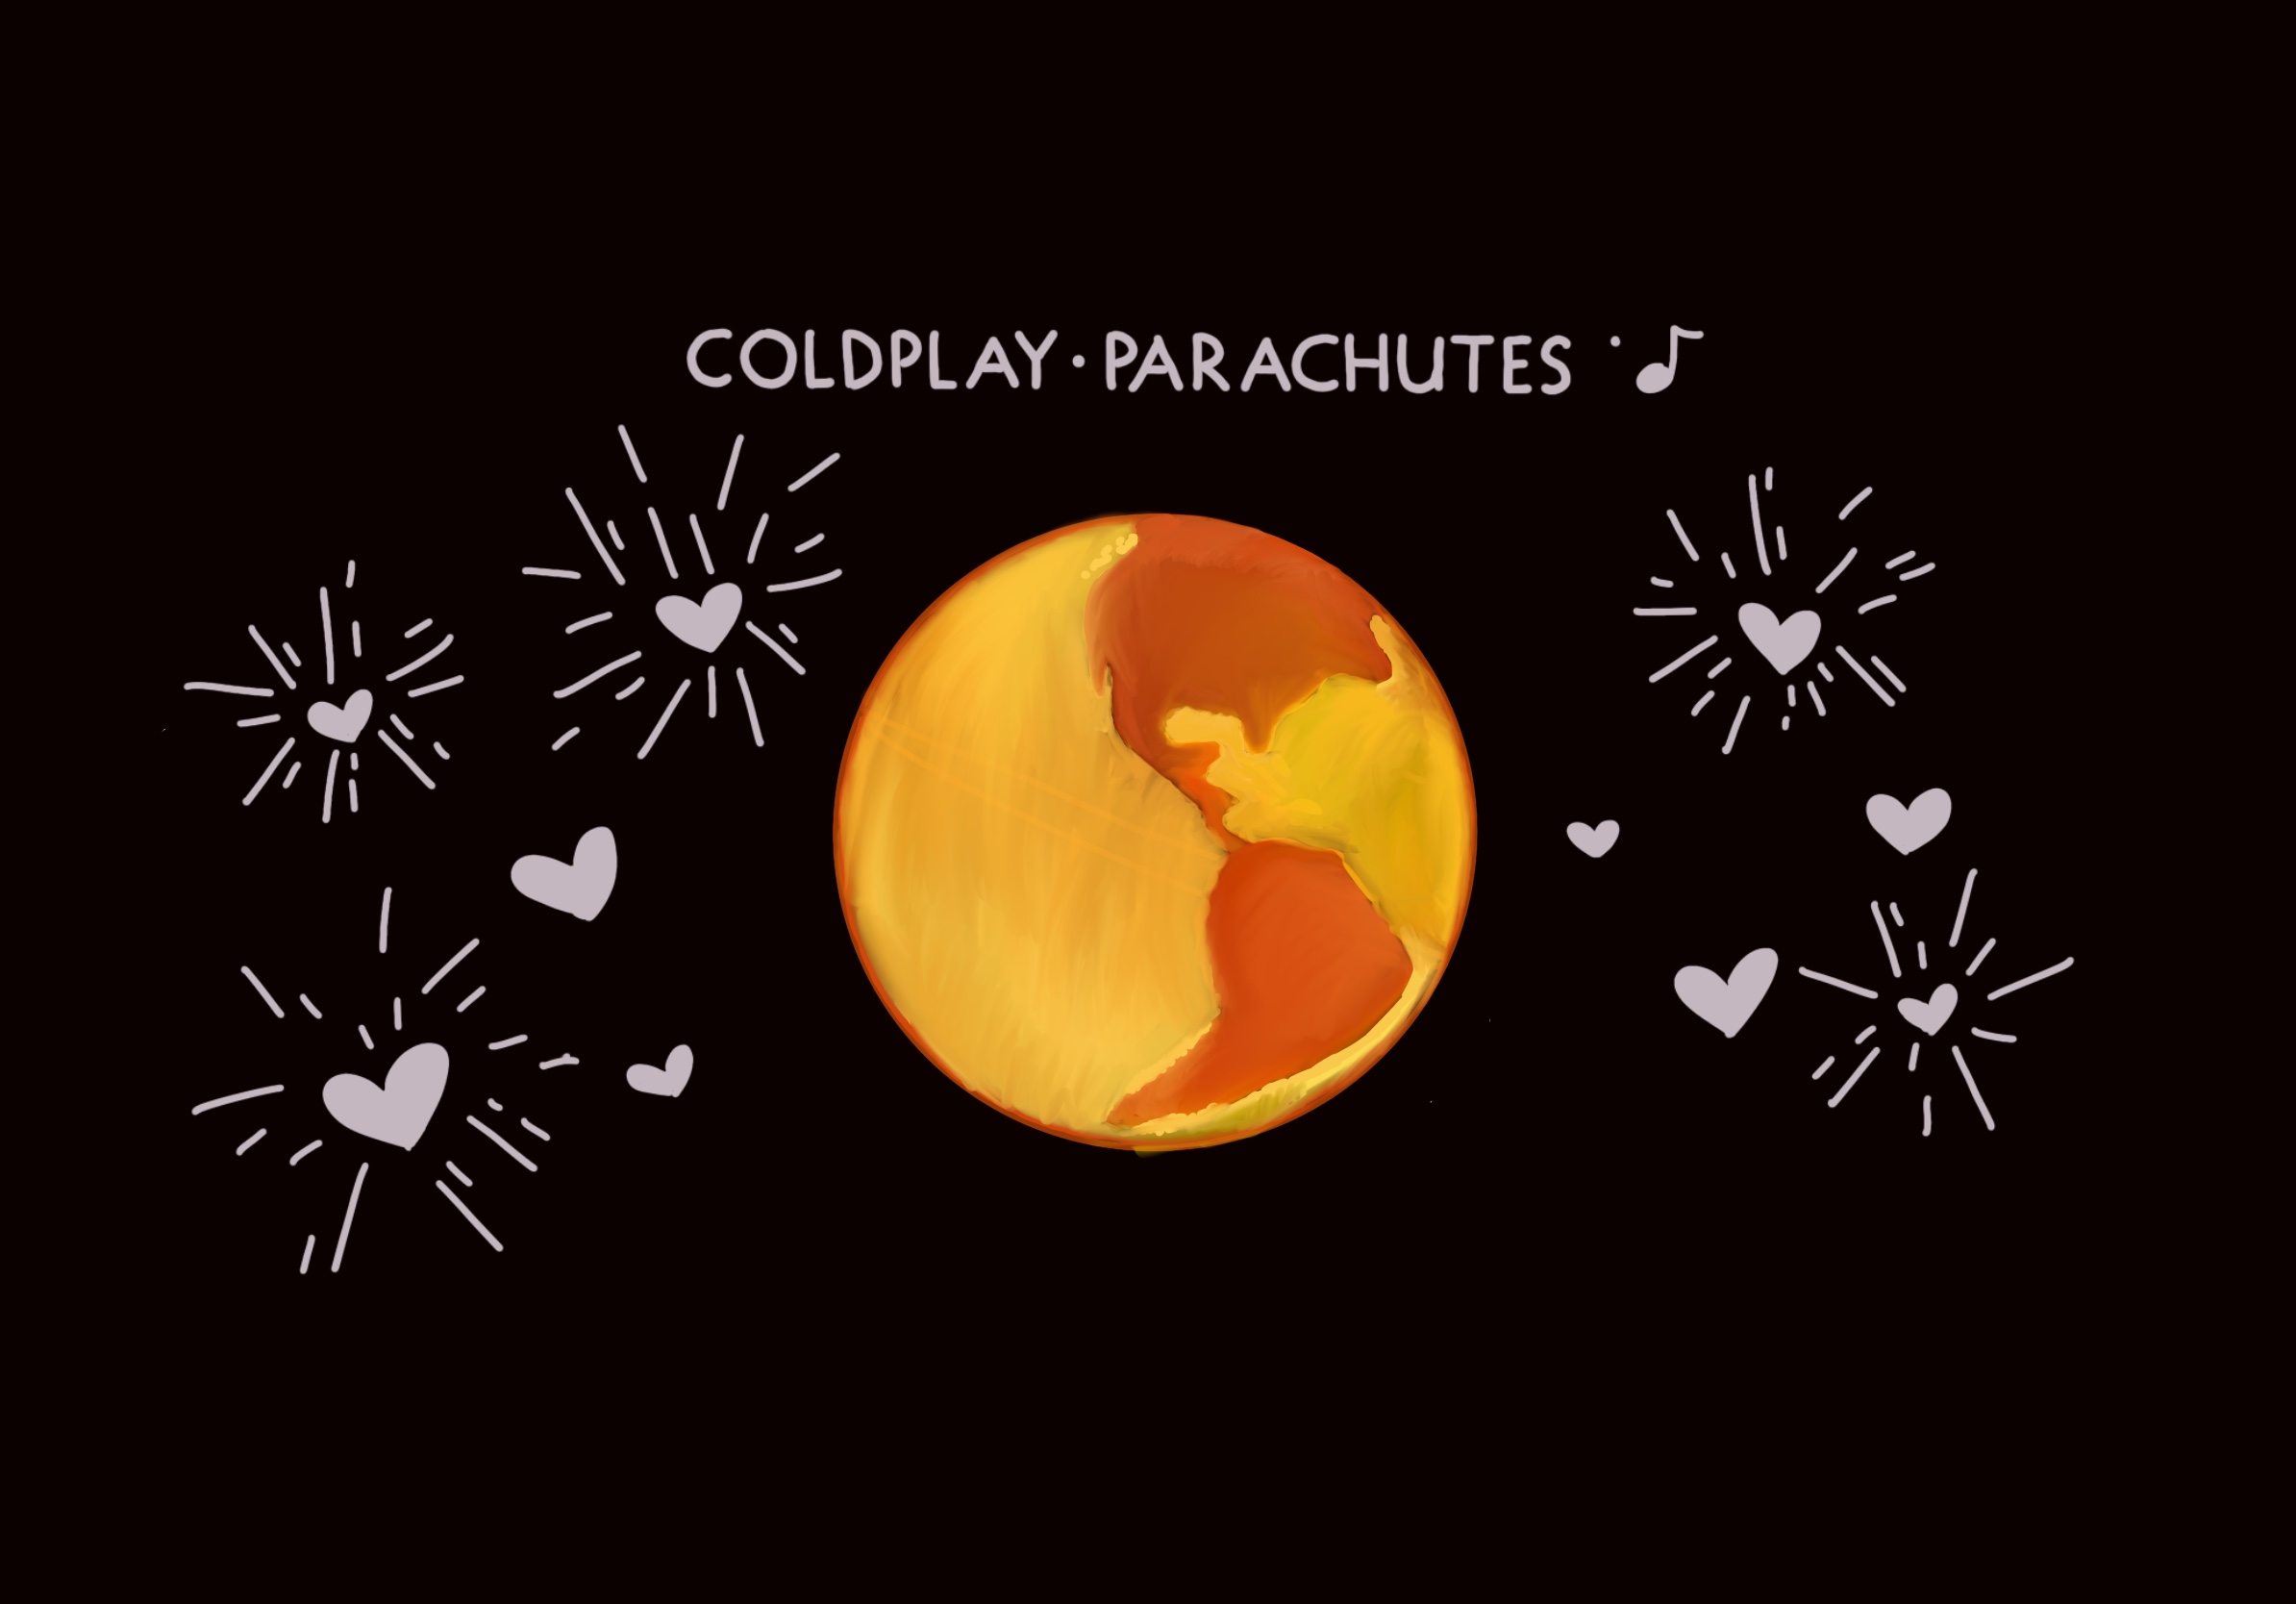 The meaning and importance of rock band Coldplay's song sparks